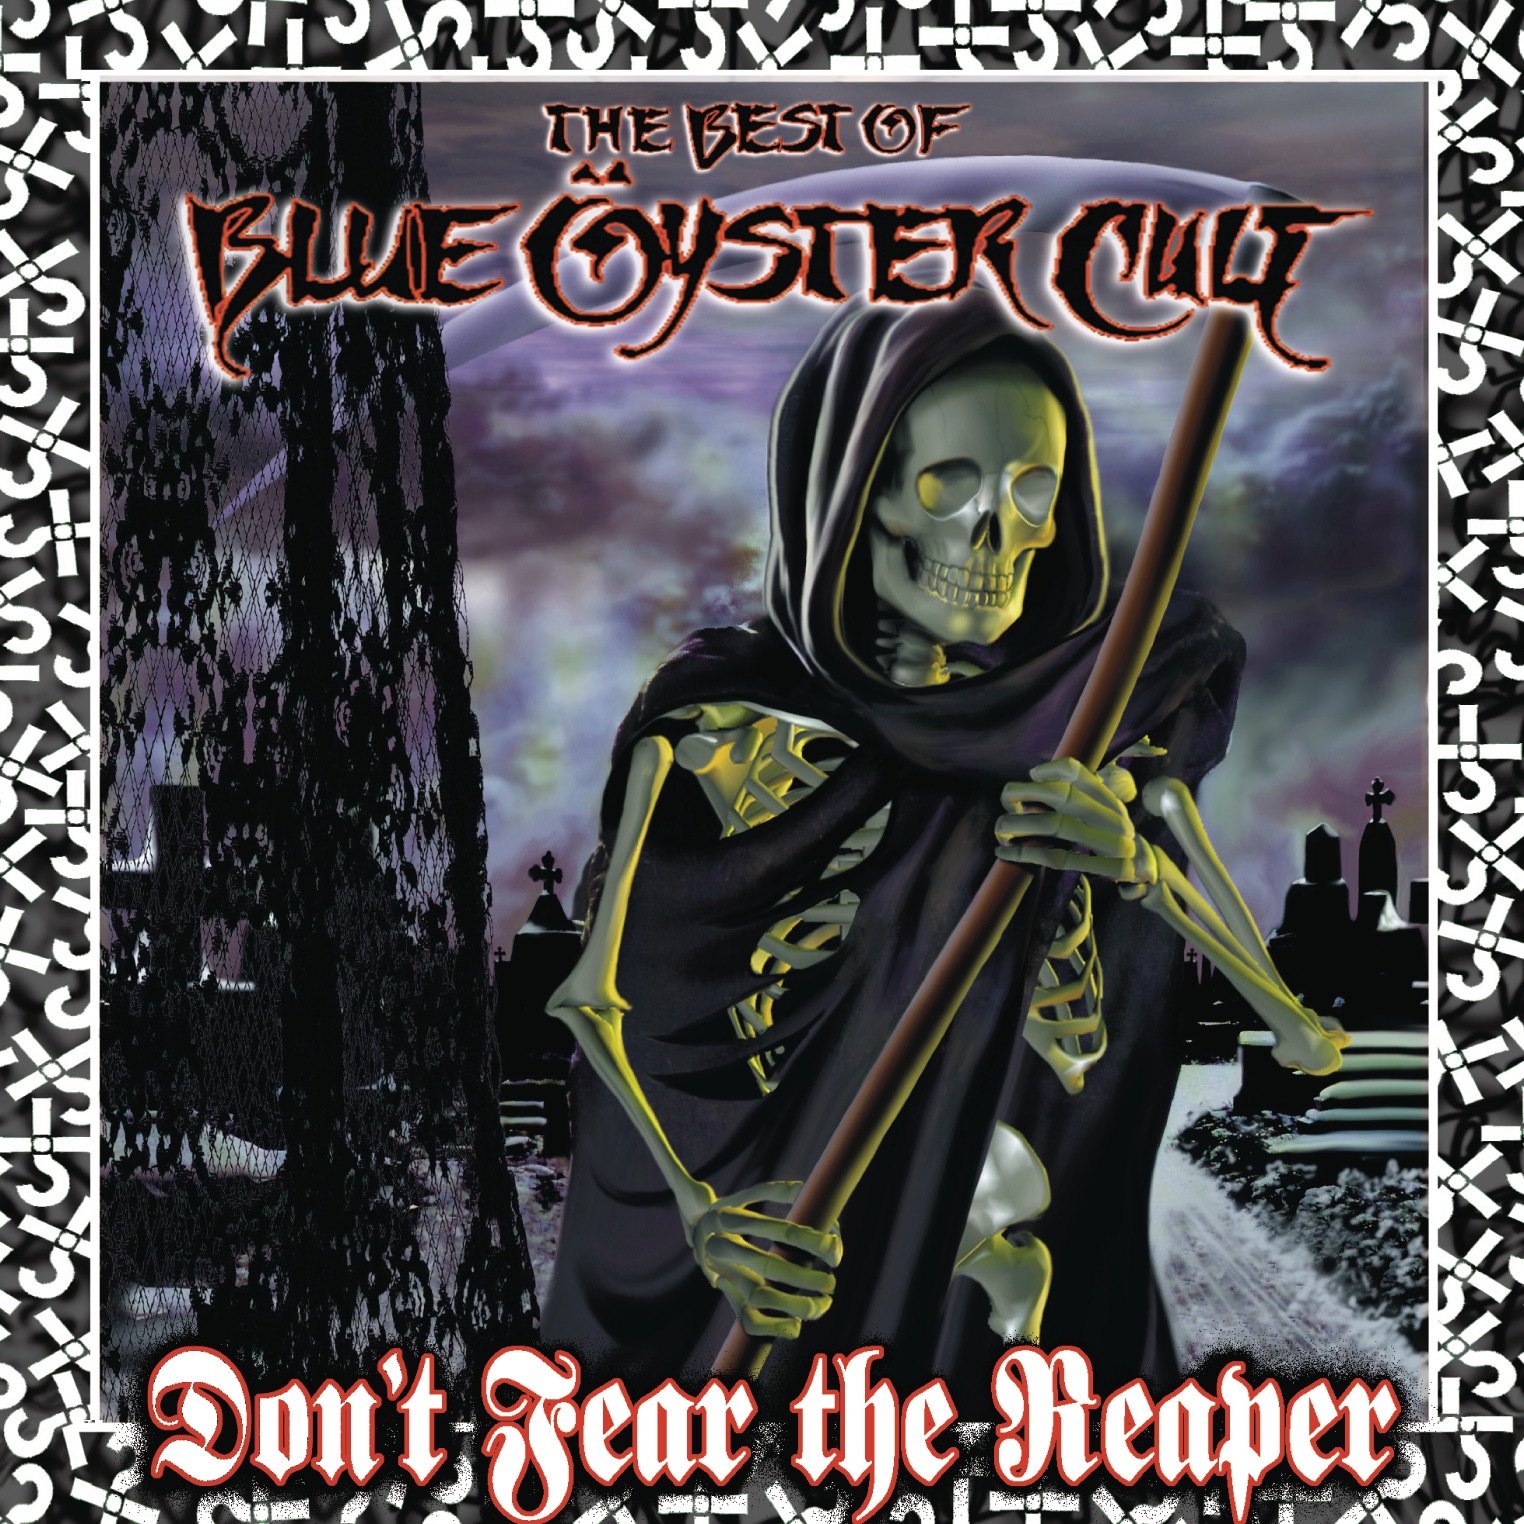 Art for (Don't Fear) The Reaper by Blue Öyster Cult